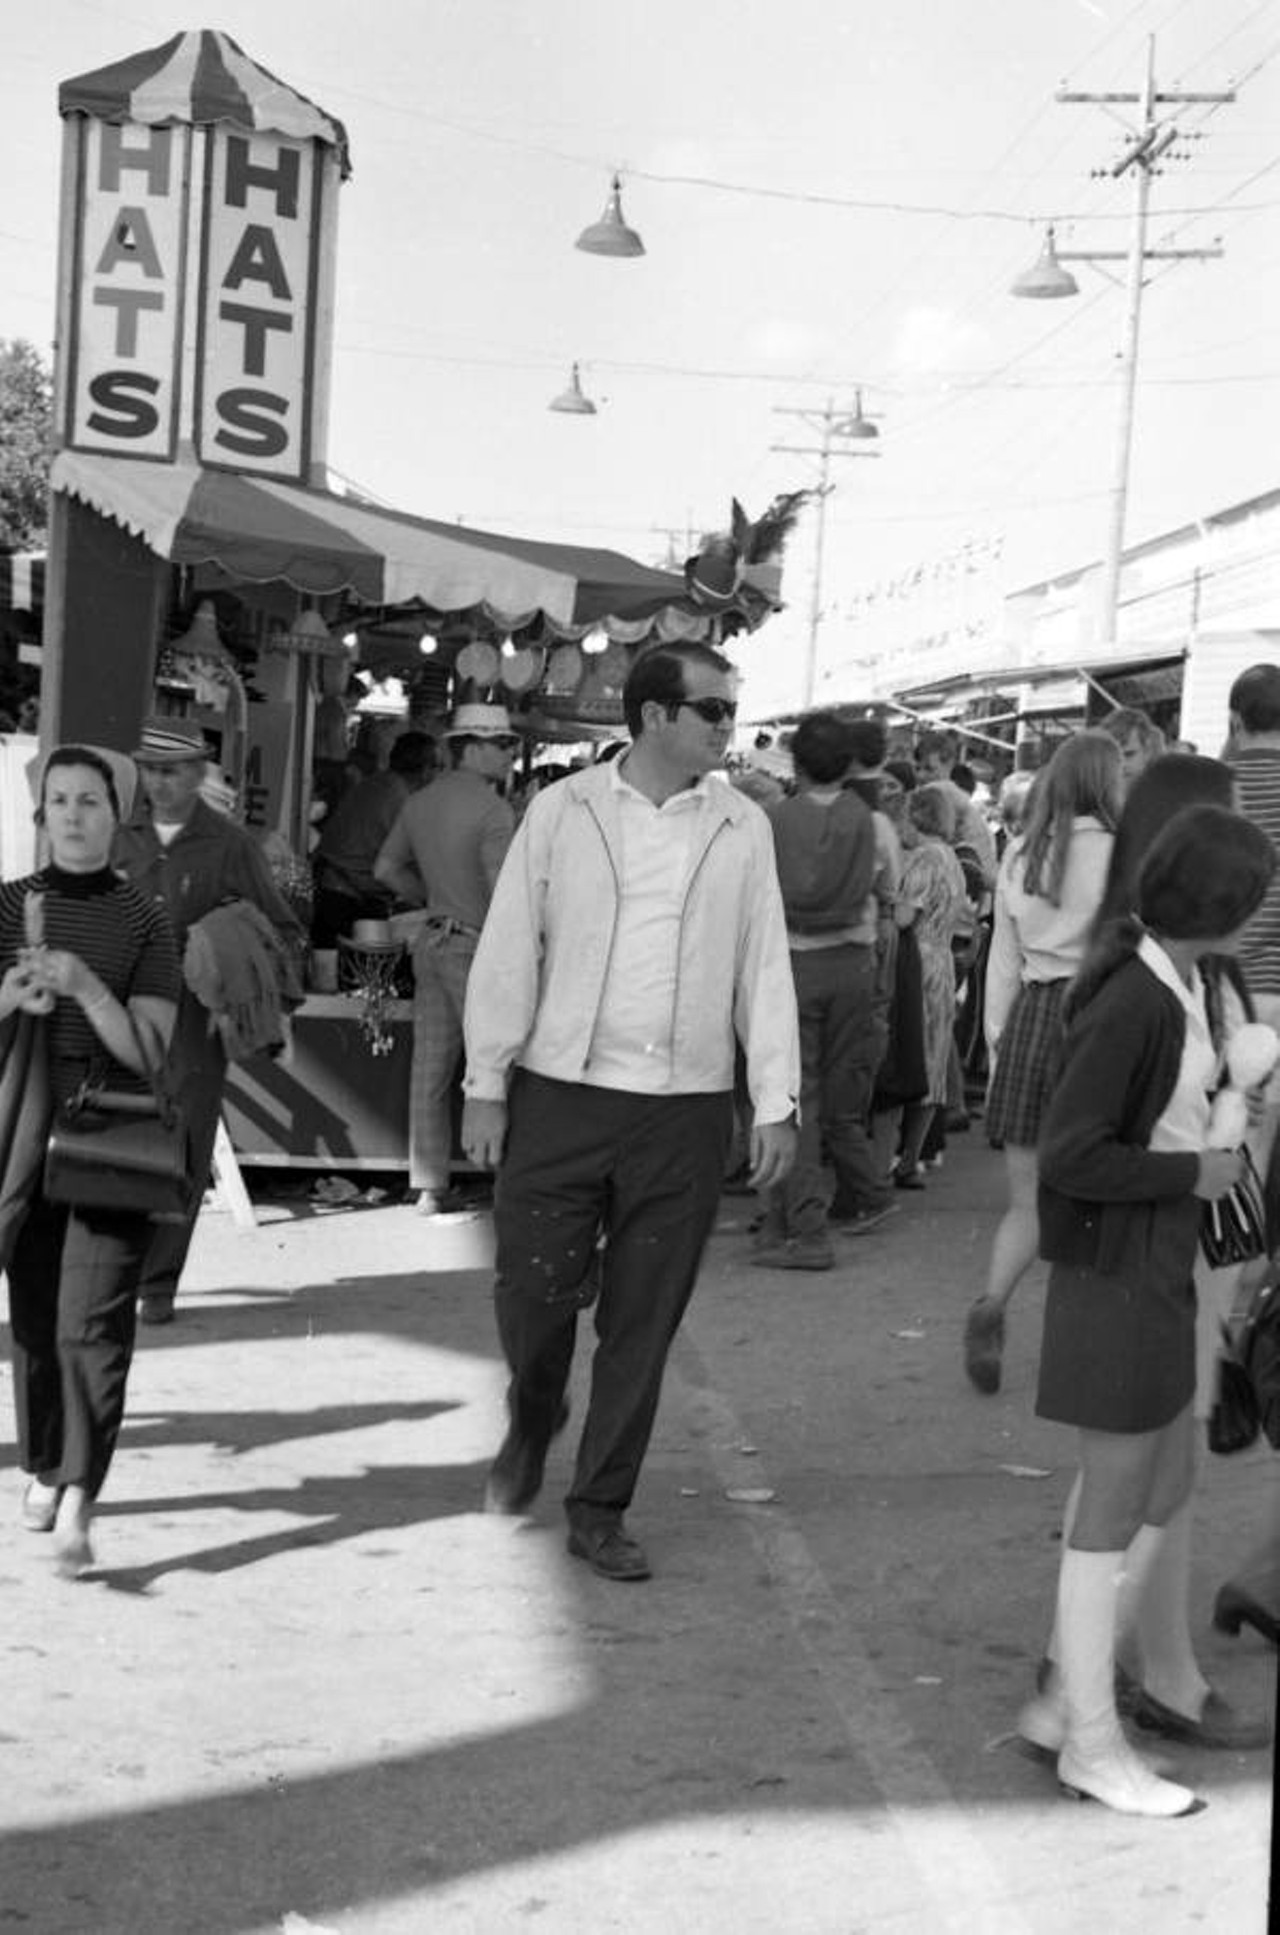 View showing people at the 1970 Florida State Fair, 1970